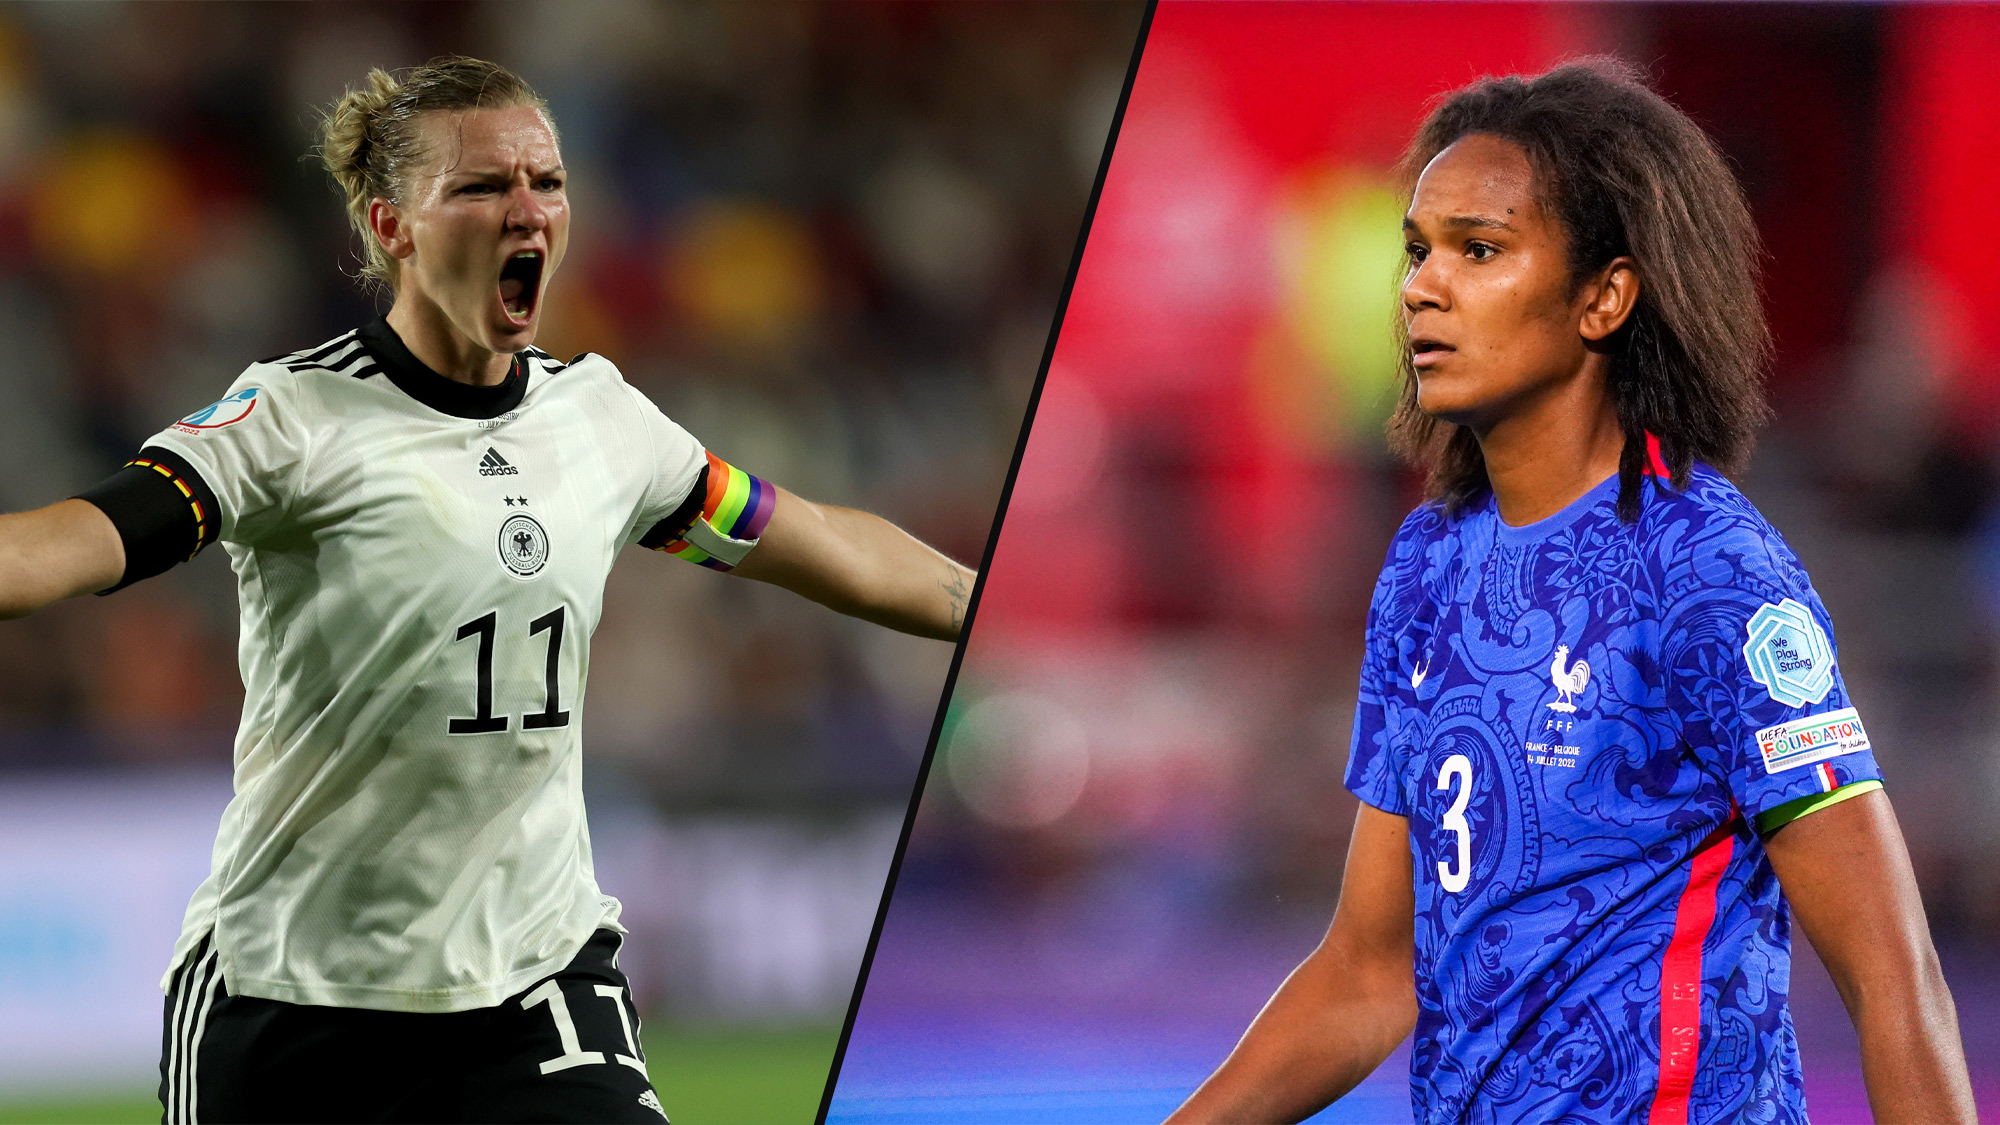 Germany Vs France Live Stream How To Watch Women S Euro 22 Semi Final Online And On Tv From Anywhere Team News Techradar